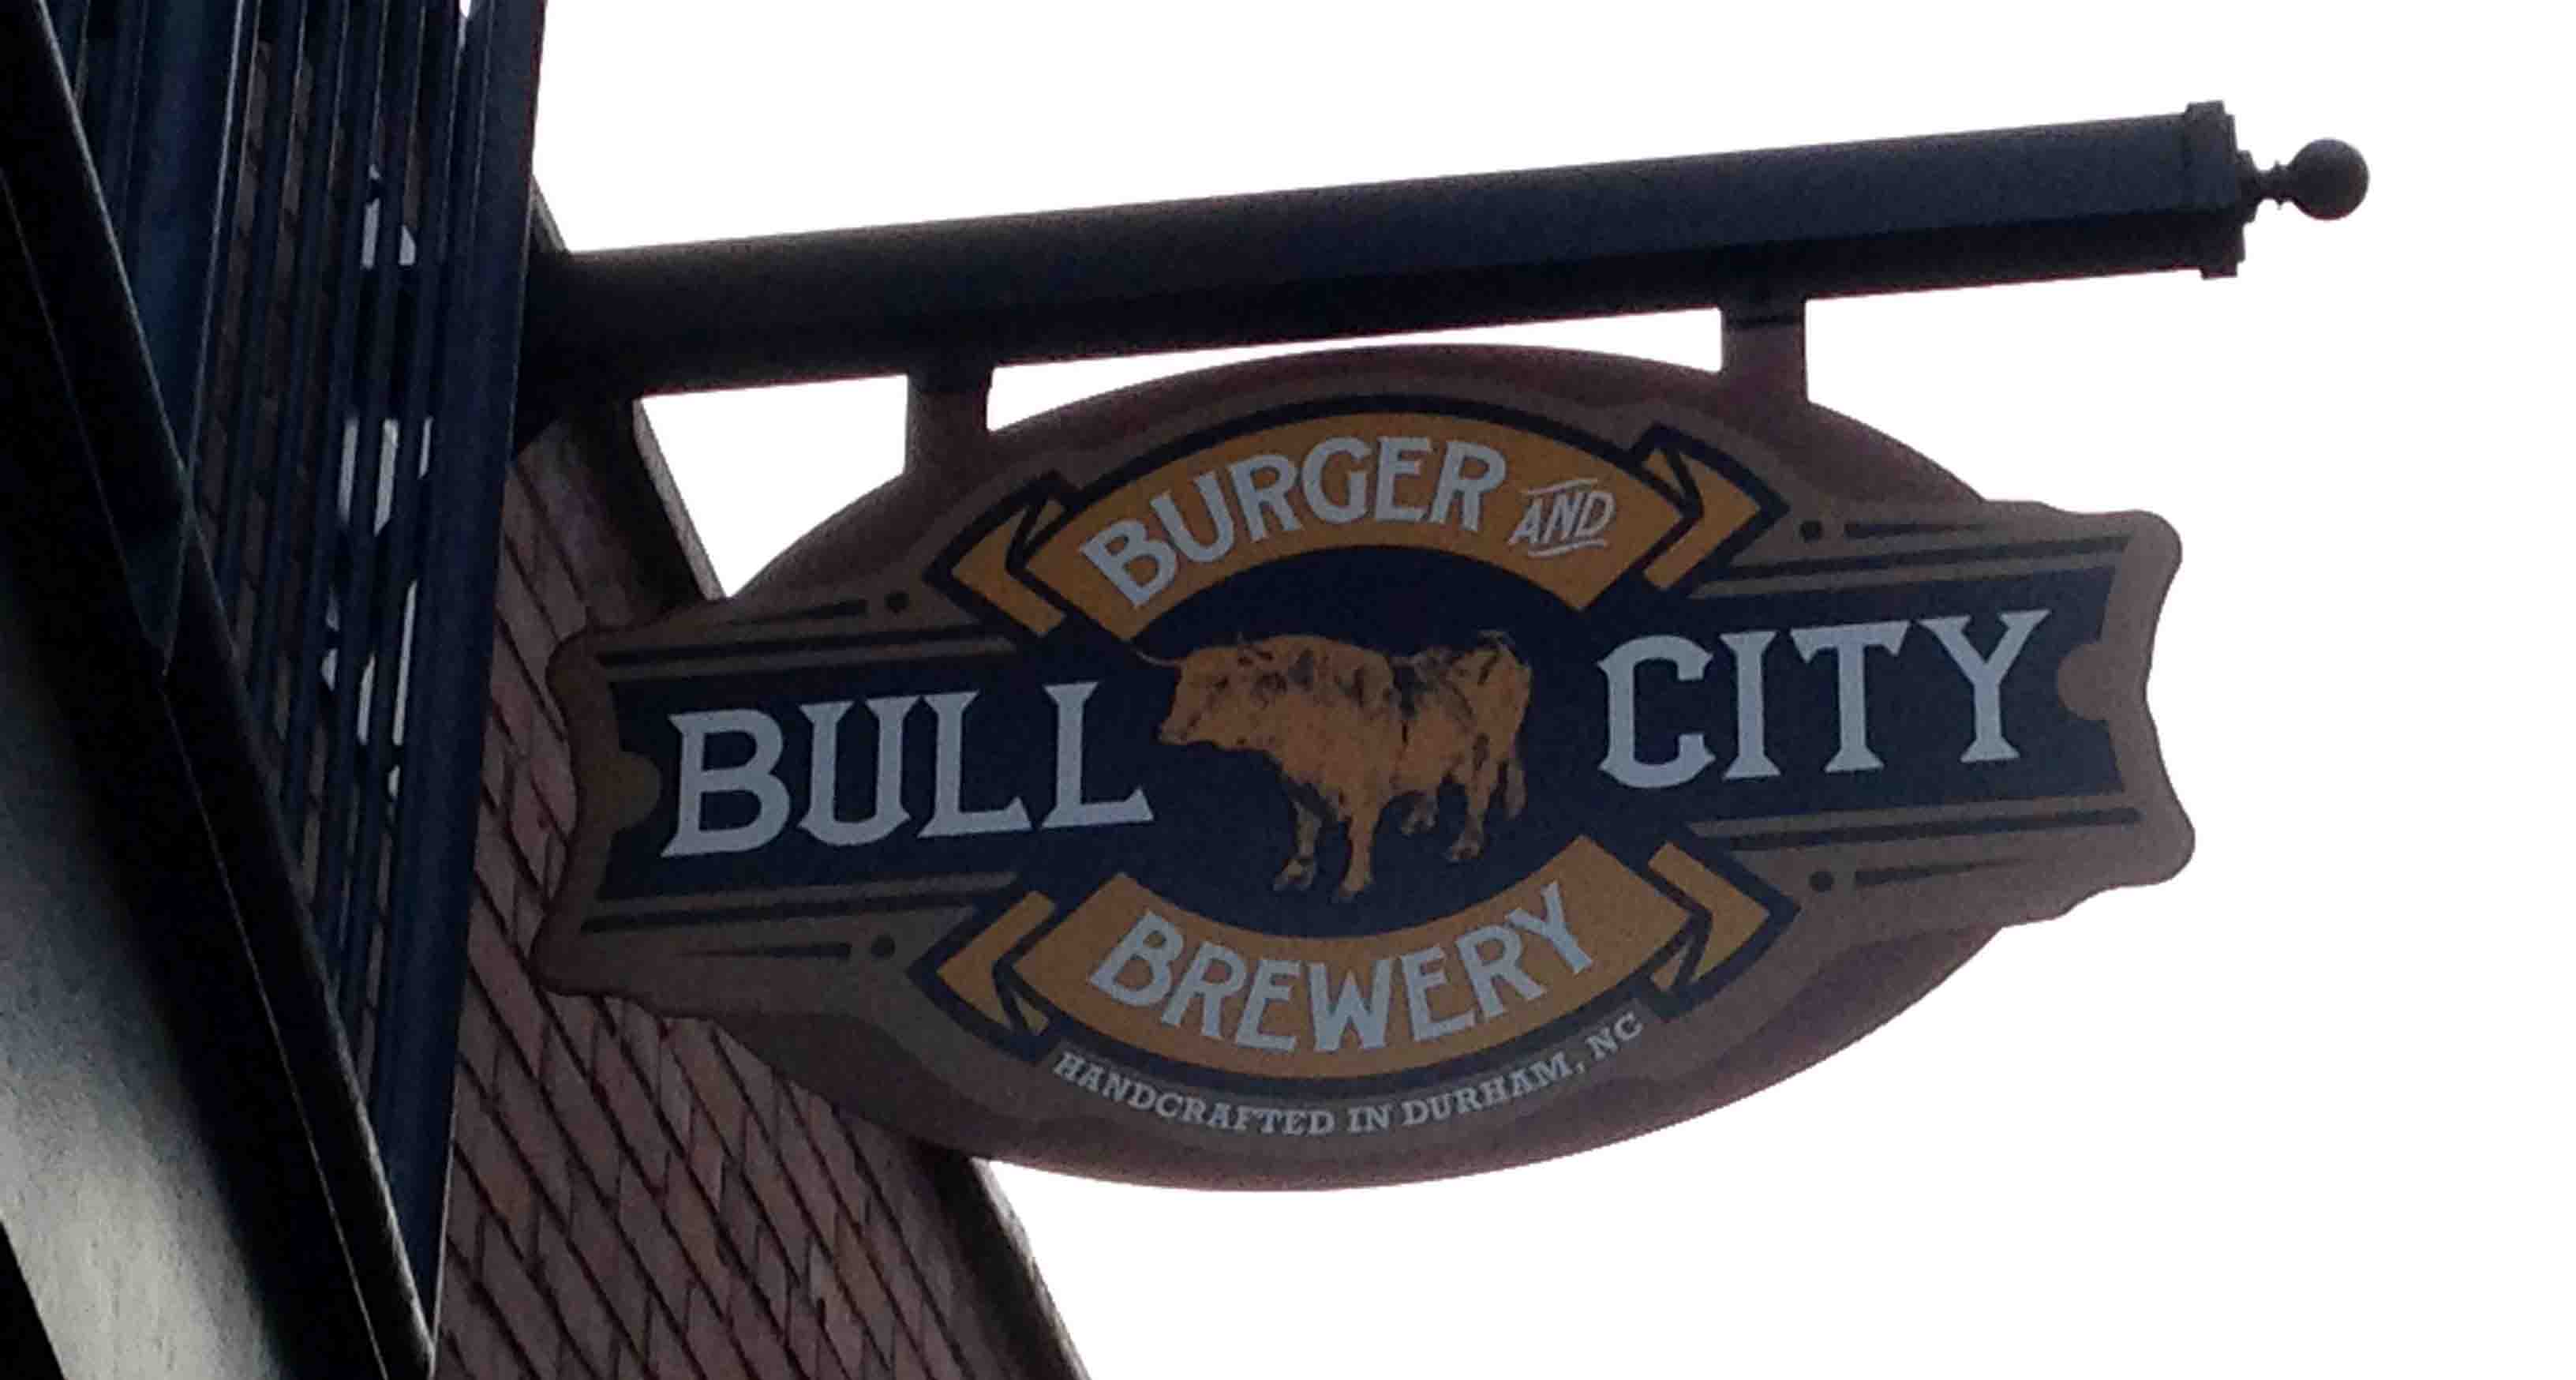 Getting my favorite burgers at Bull City Burger and Brewery! #trianglebucketlist